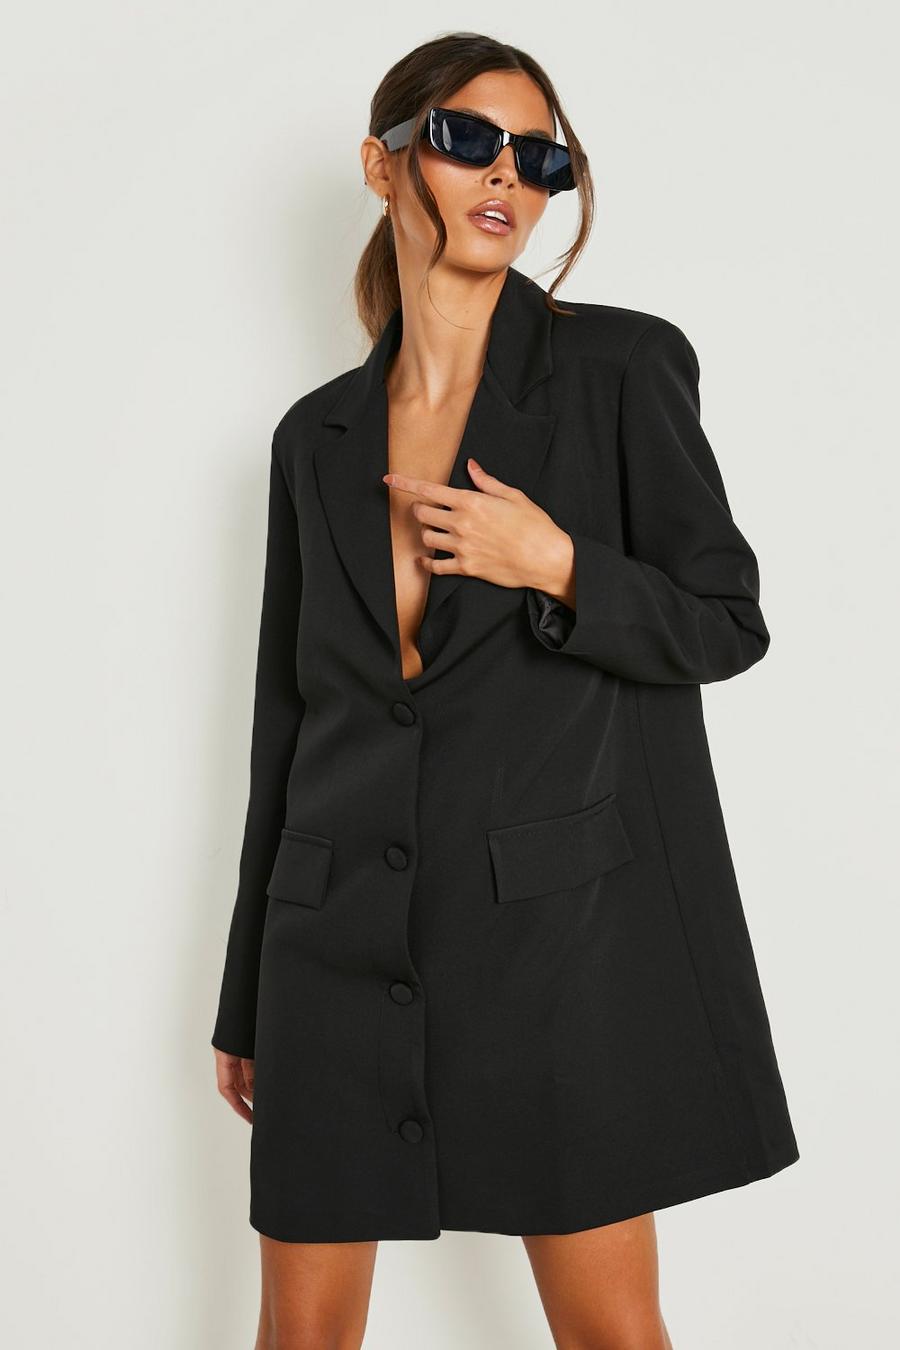 Black Boxy Relaxed Fit Tailored Blazer Dress